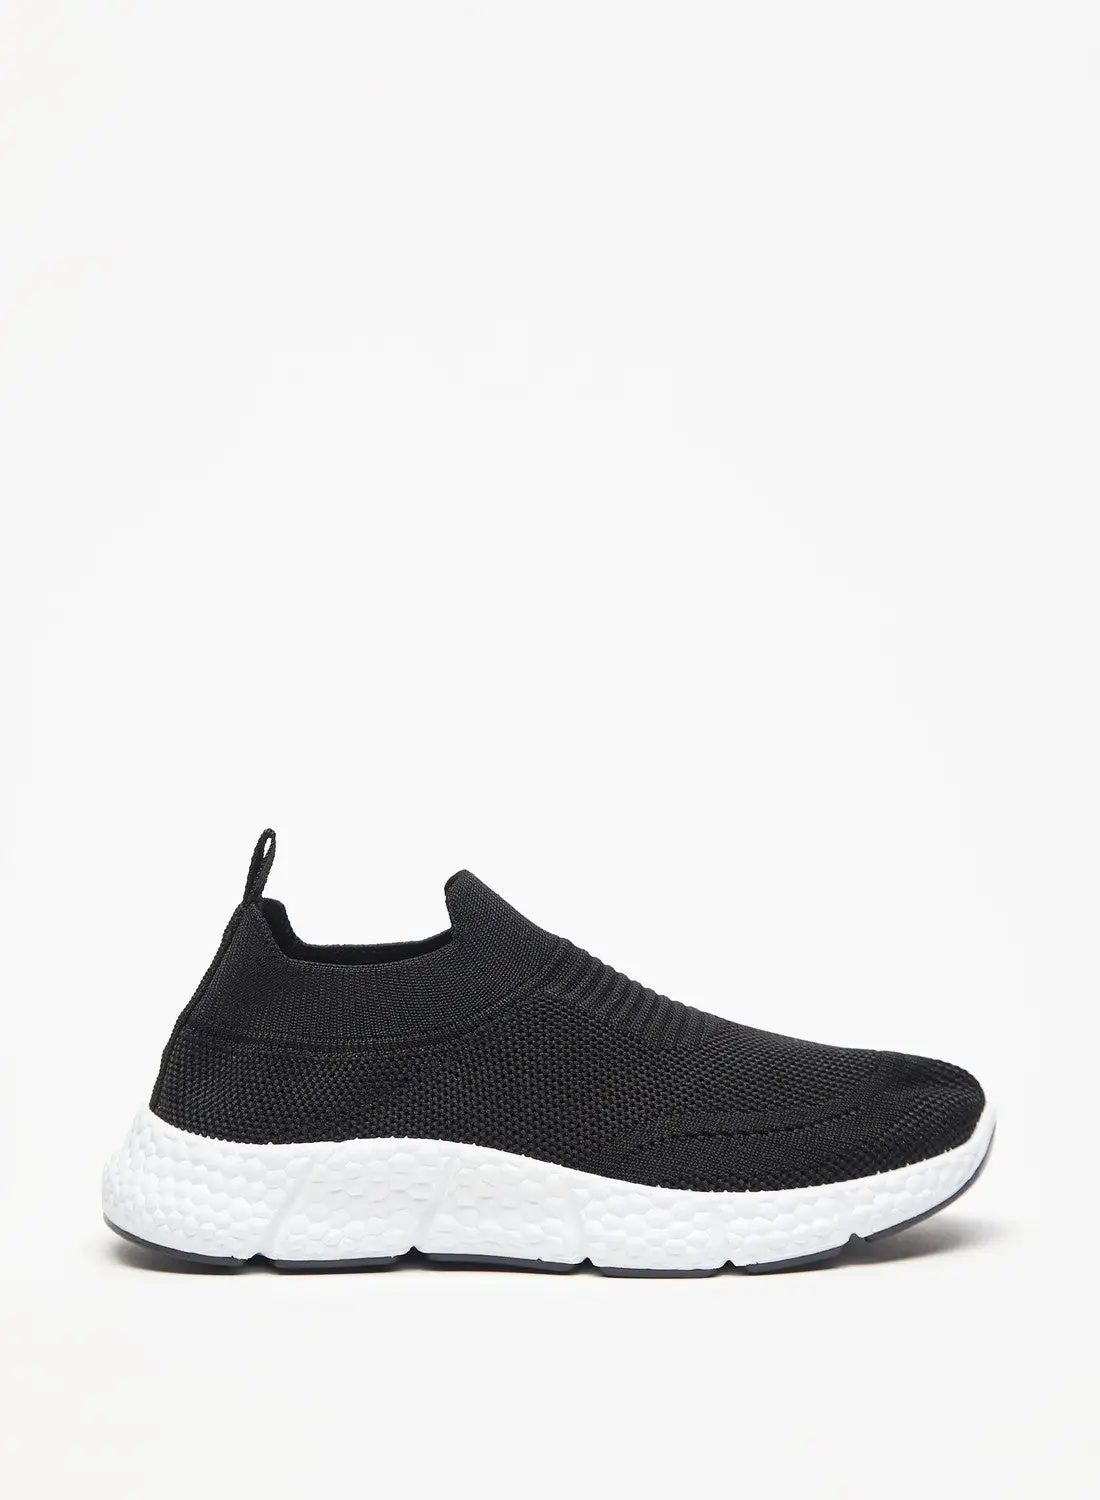 shoexpress Boys Textured Slip on Trainer Shoes with Pull Tabs Black